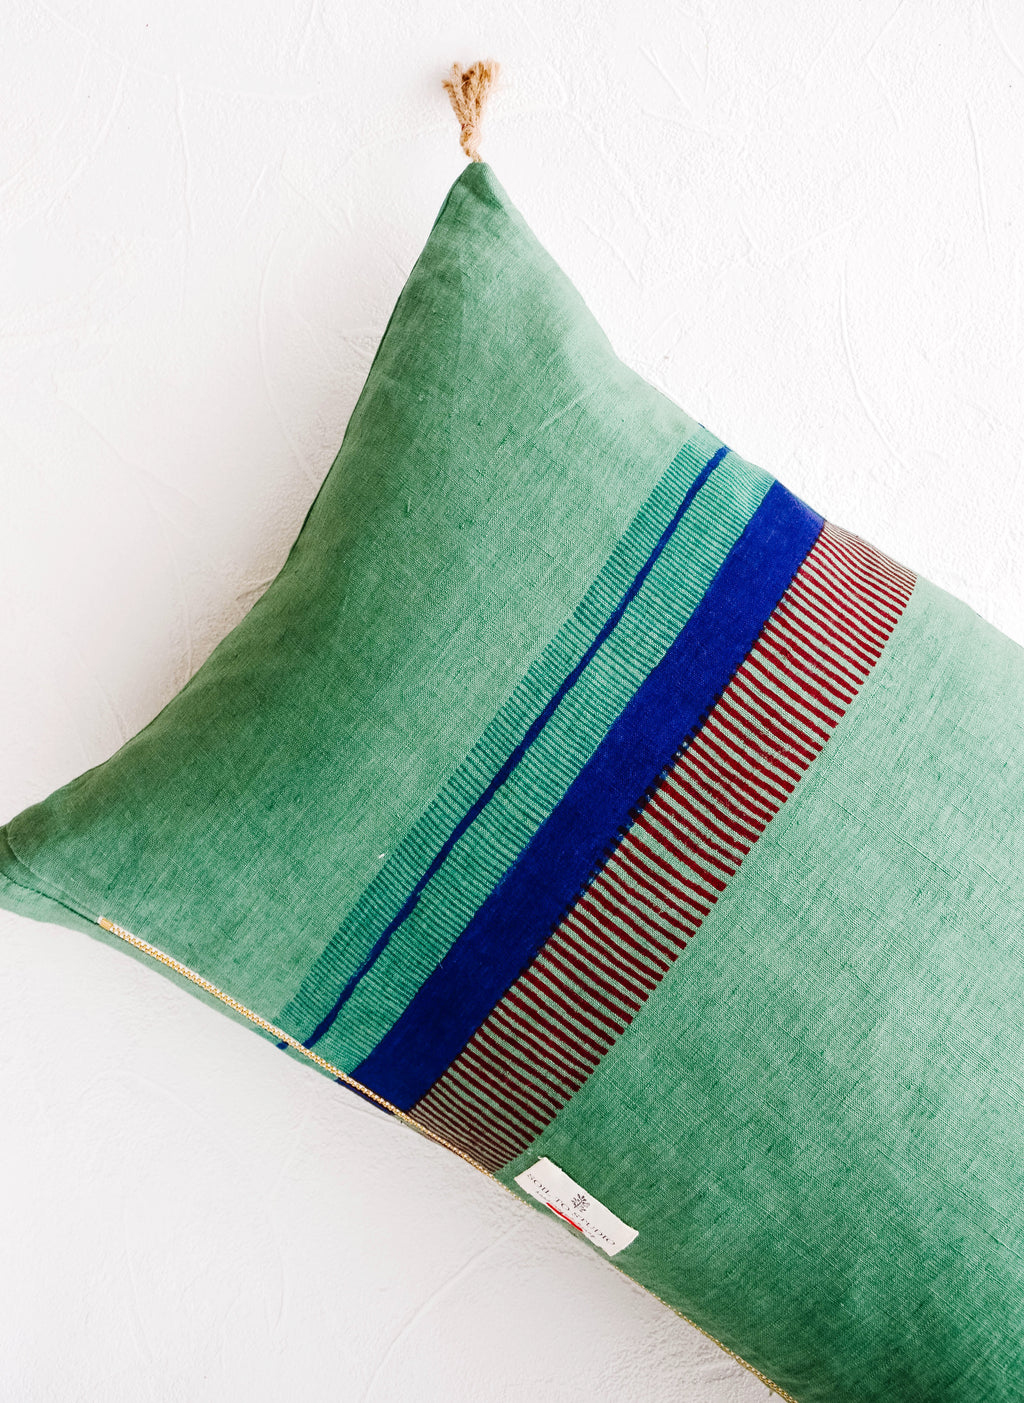 3: Back of linen throw pillow showing a series of block printed stripes and exposed brass zip closure